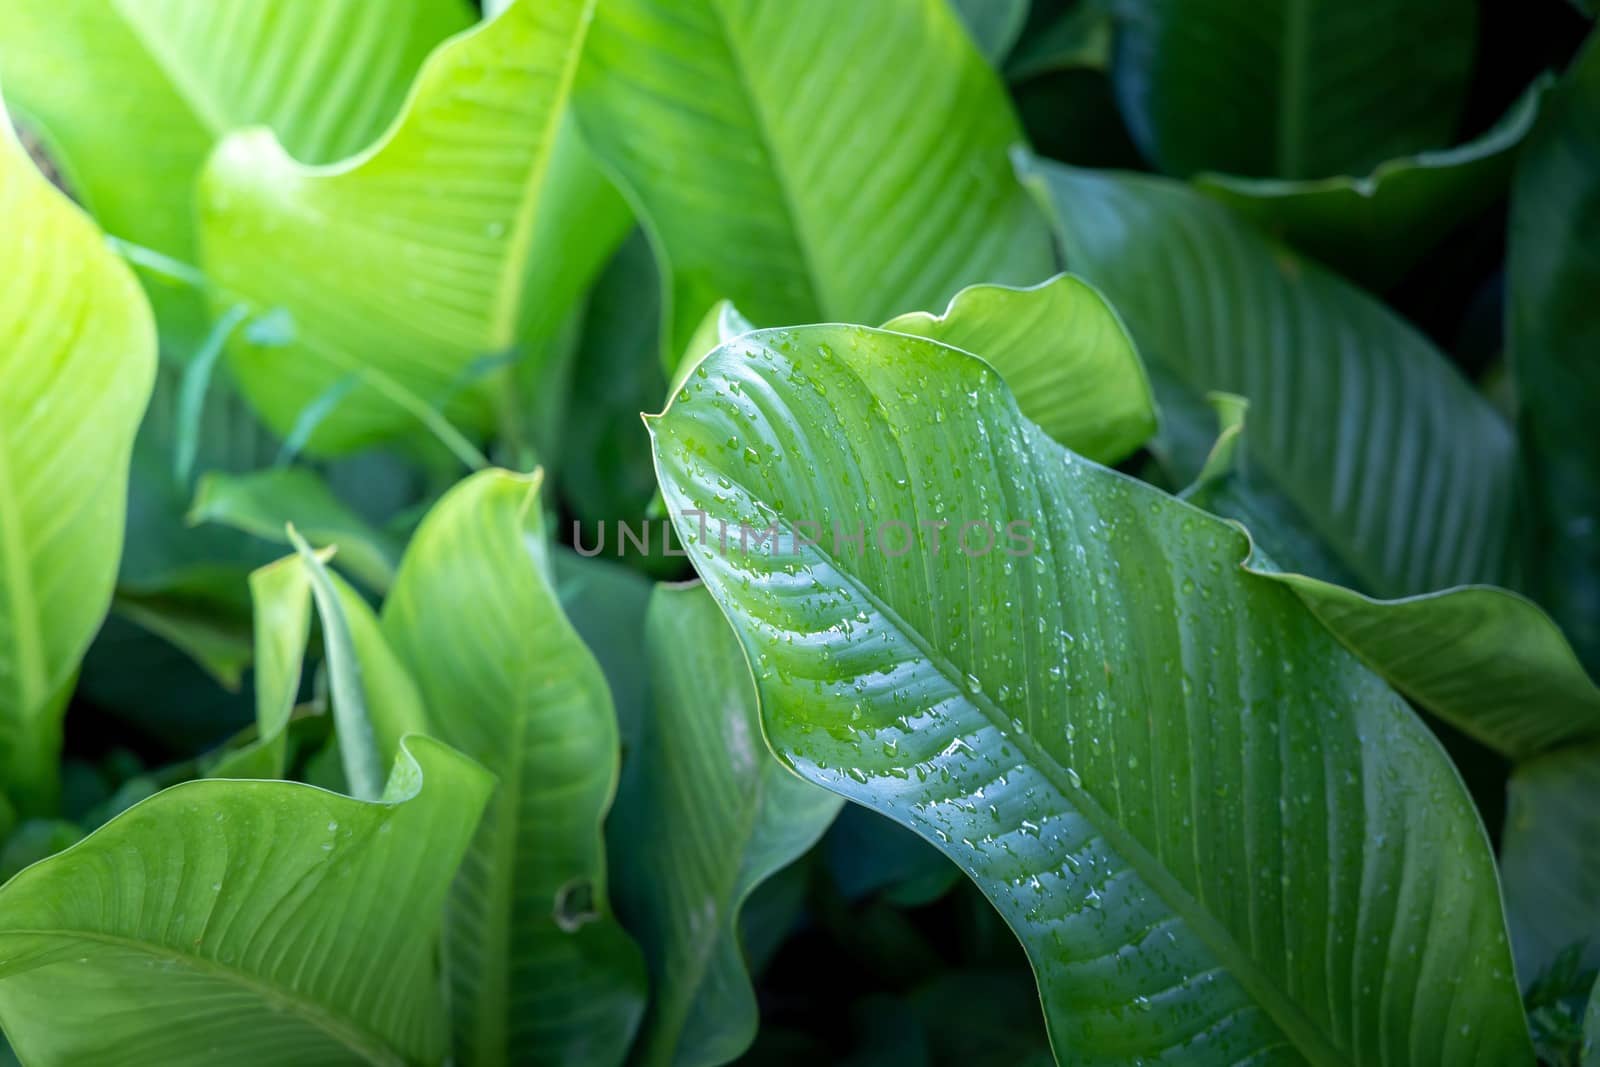 Background texture of leaves closeup. Green Leaves Background with White Paper Frame. Flat Lay